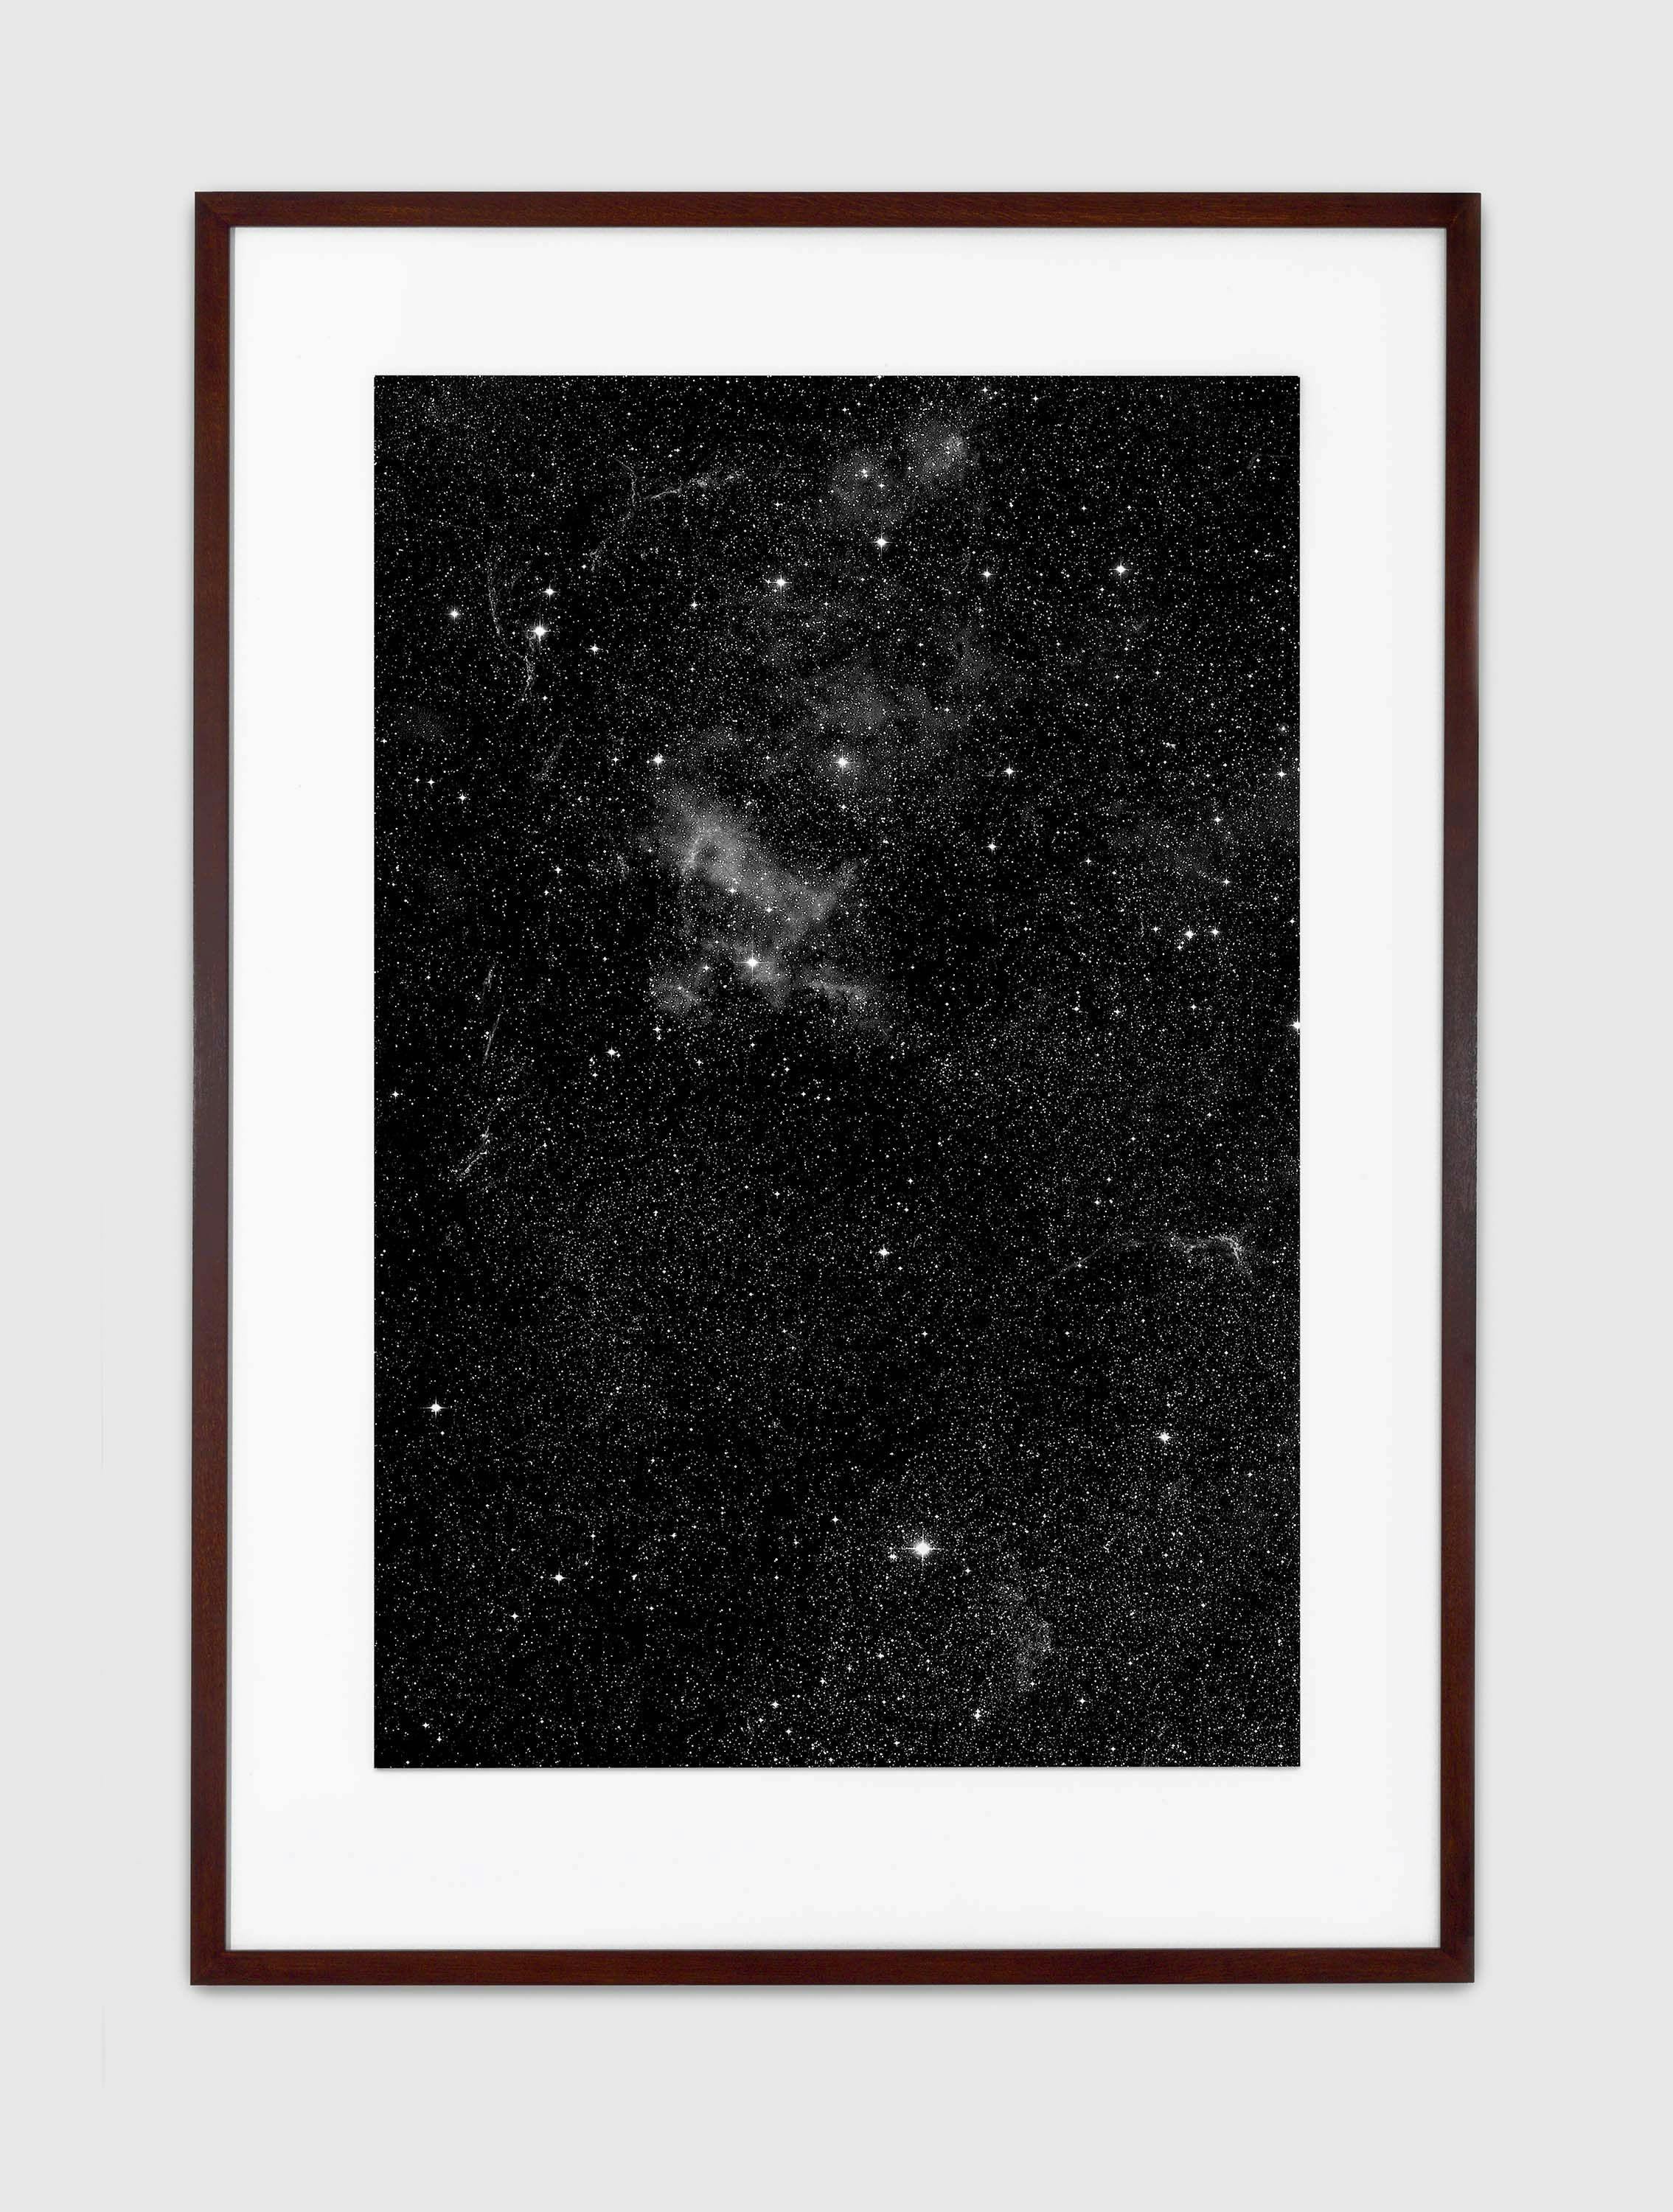 A chromogenic print with Diasec by Thomas Ruff, titled Stern 08h 52m/-45°, dated 1991.